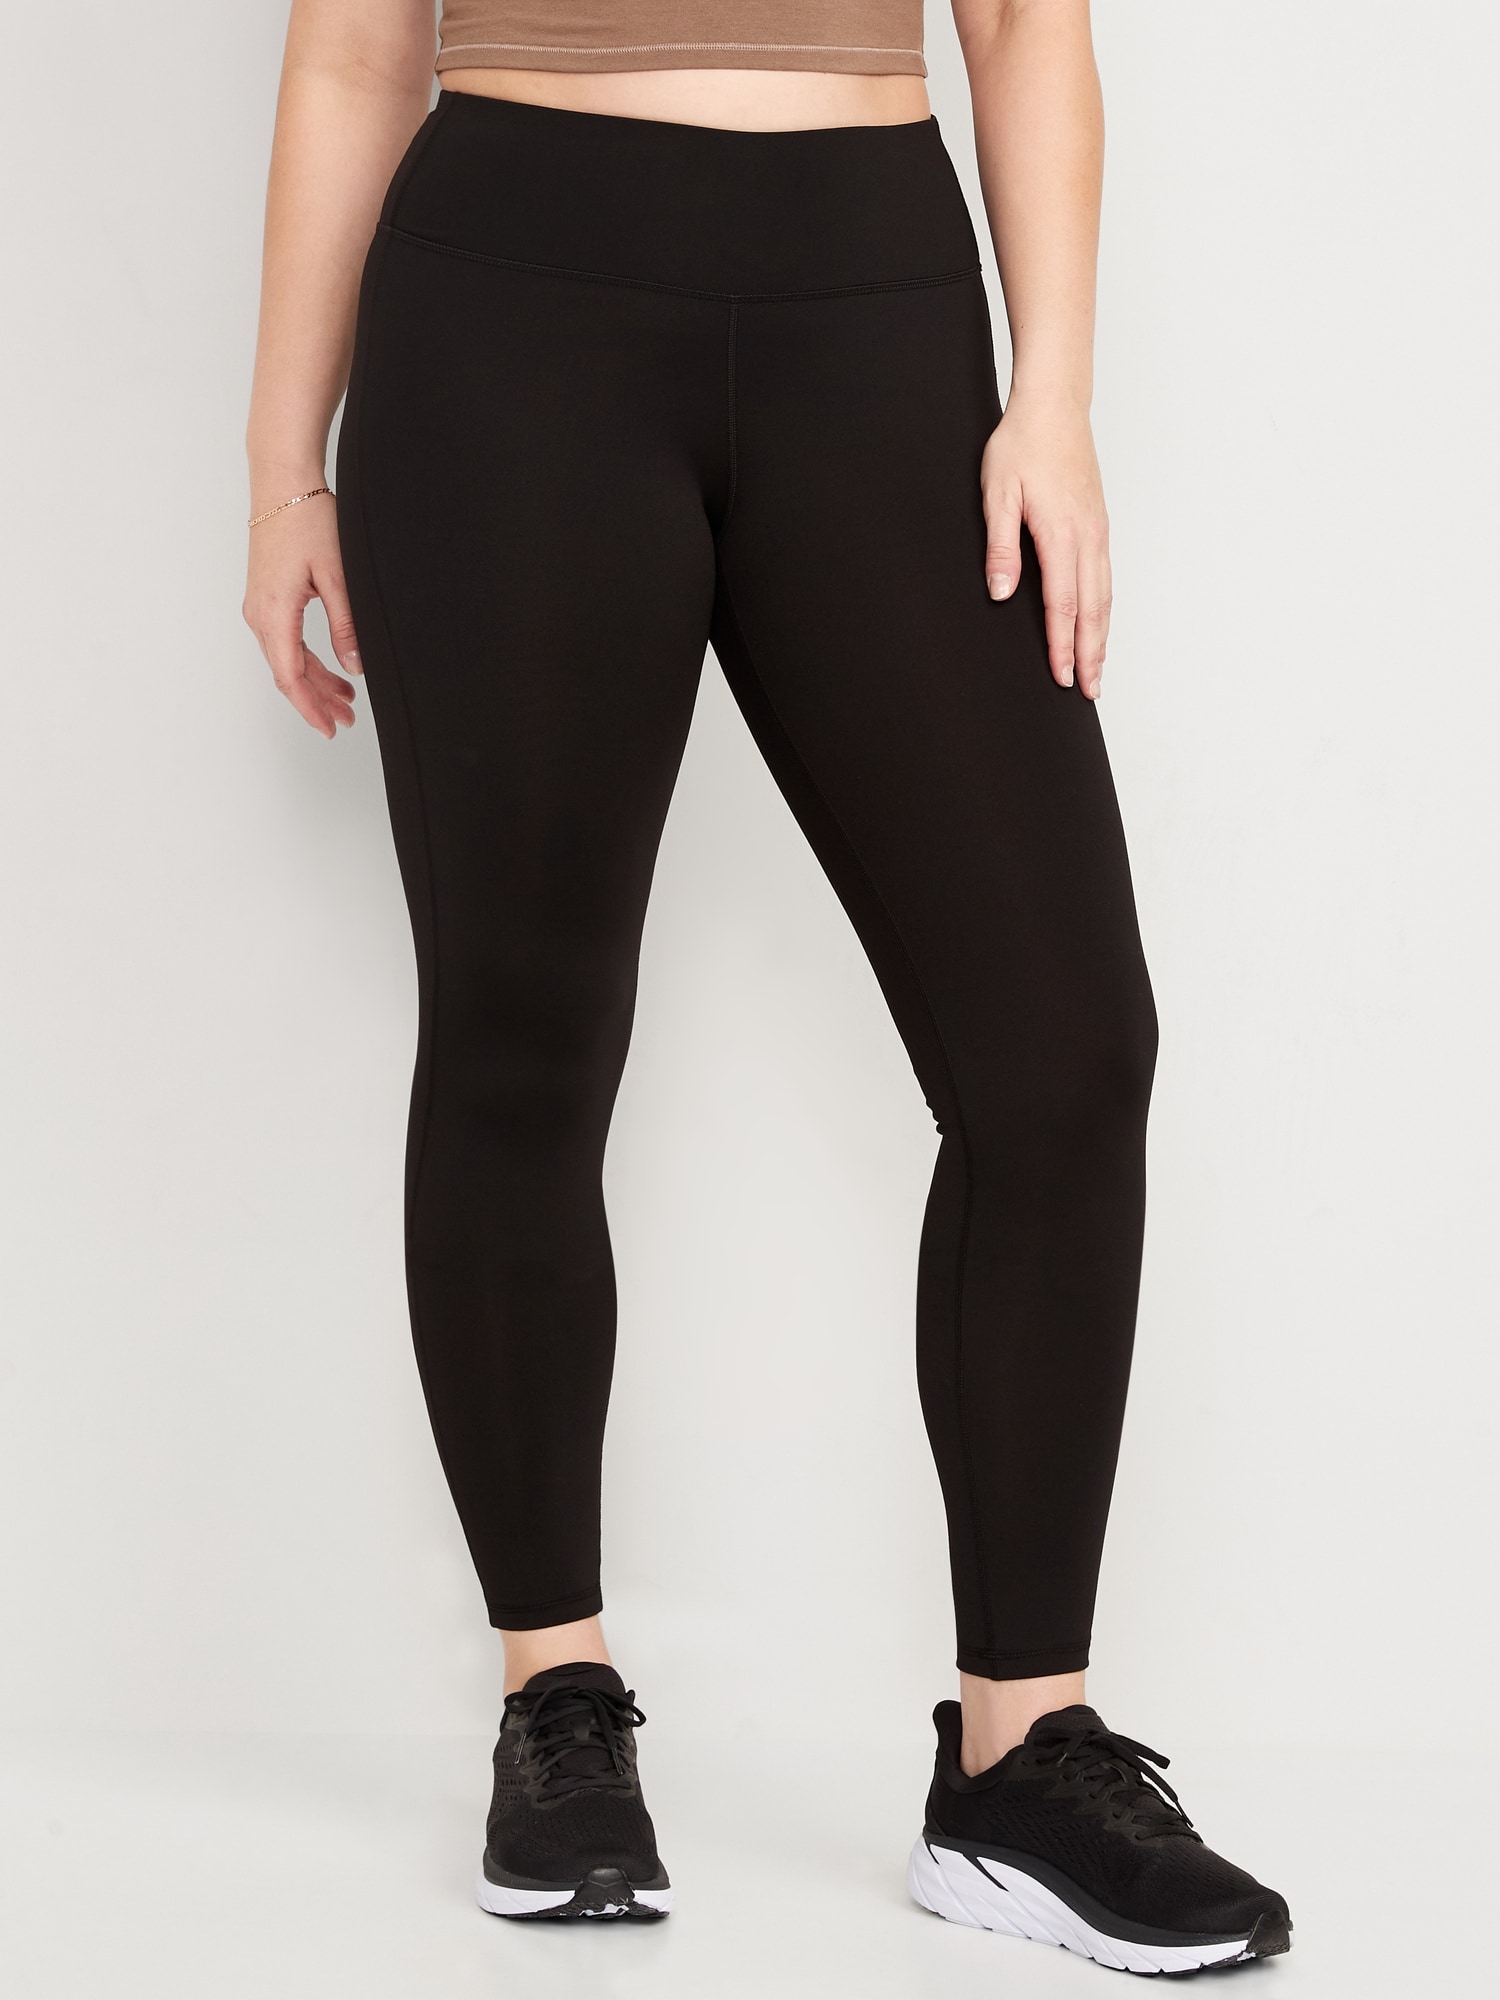 Old Navy Powerpress Leggings Review 2019  International Society of  Precision Agriculture